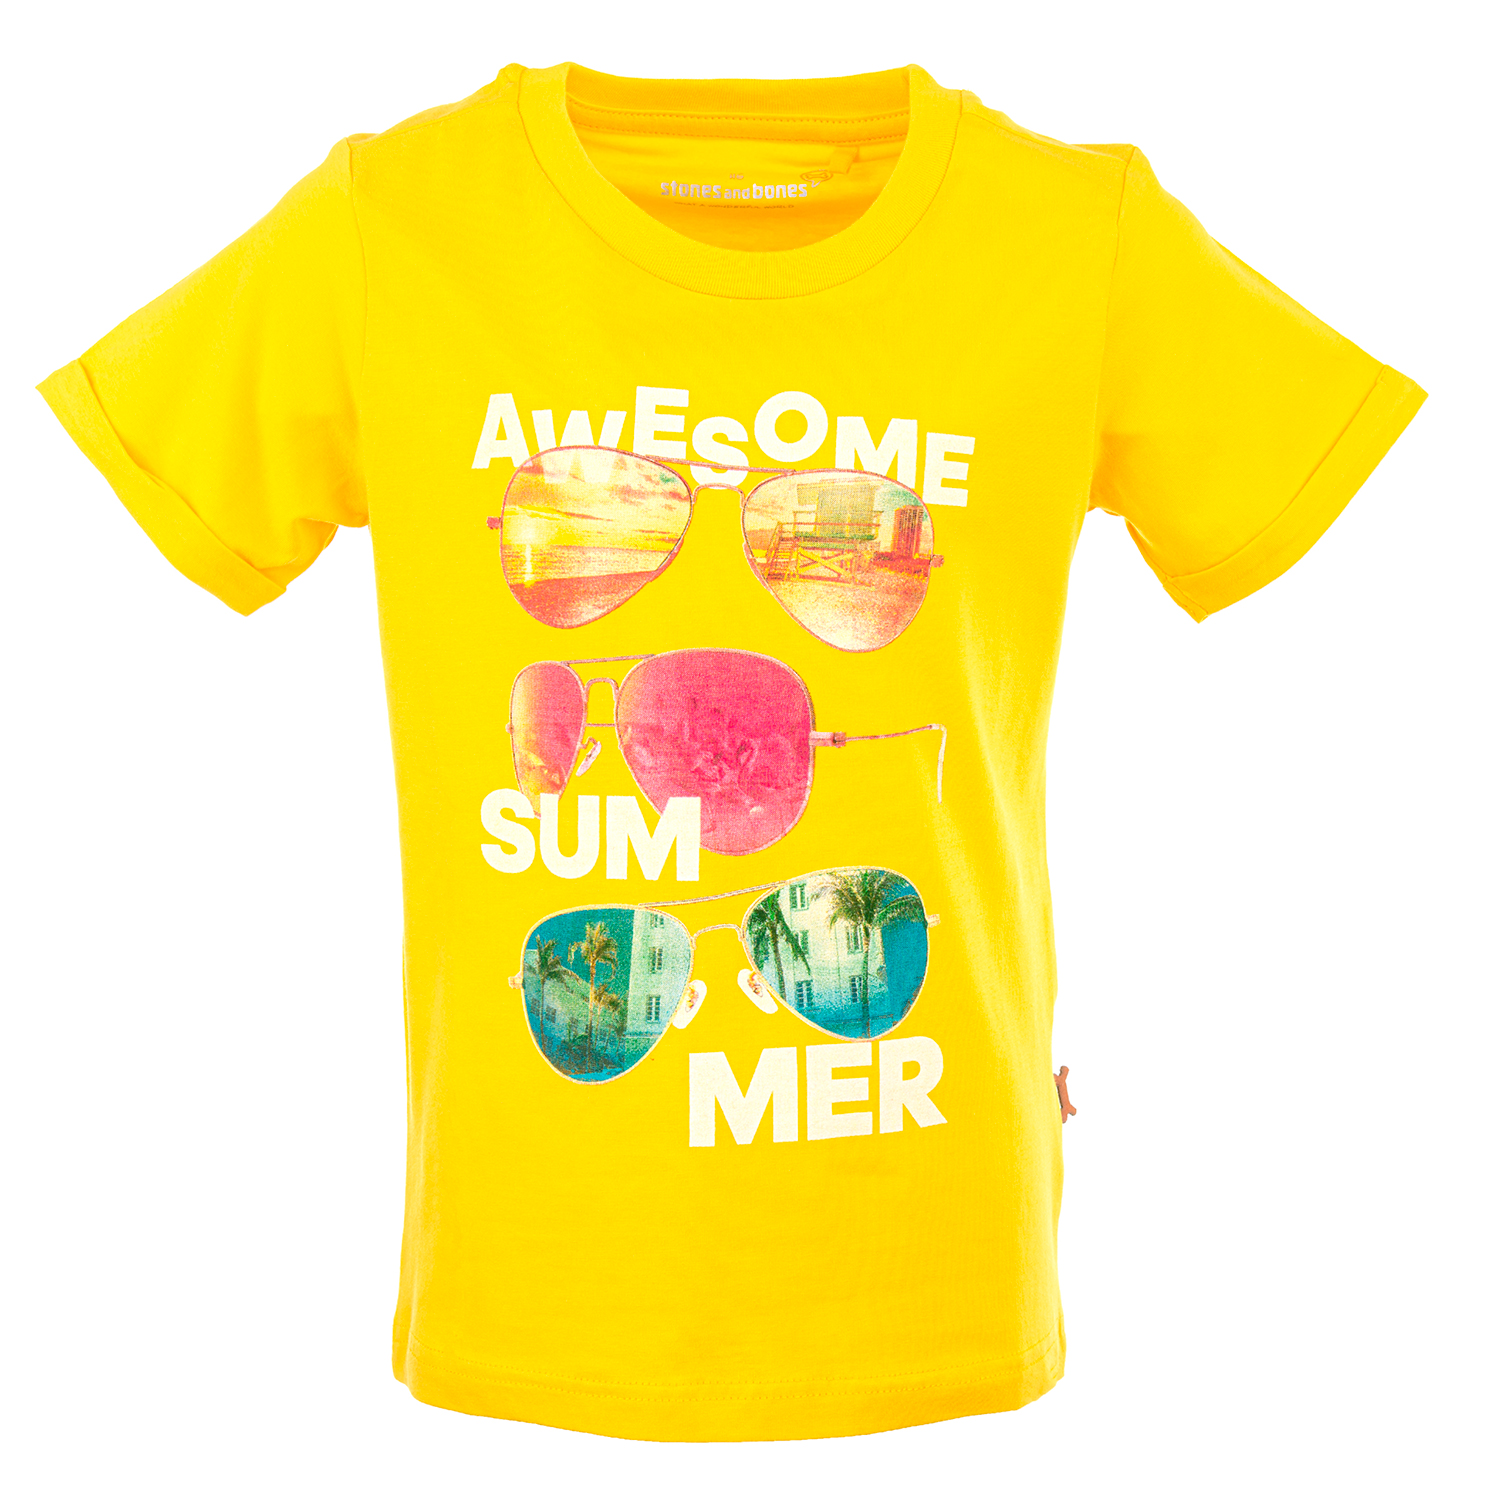 Josey - AWESOME SUMMER yellow